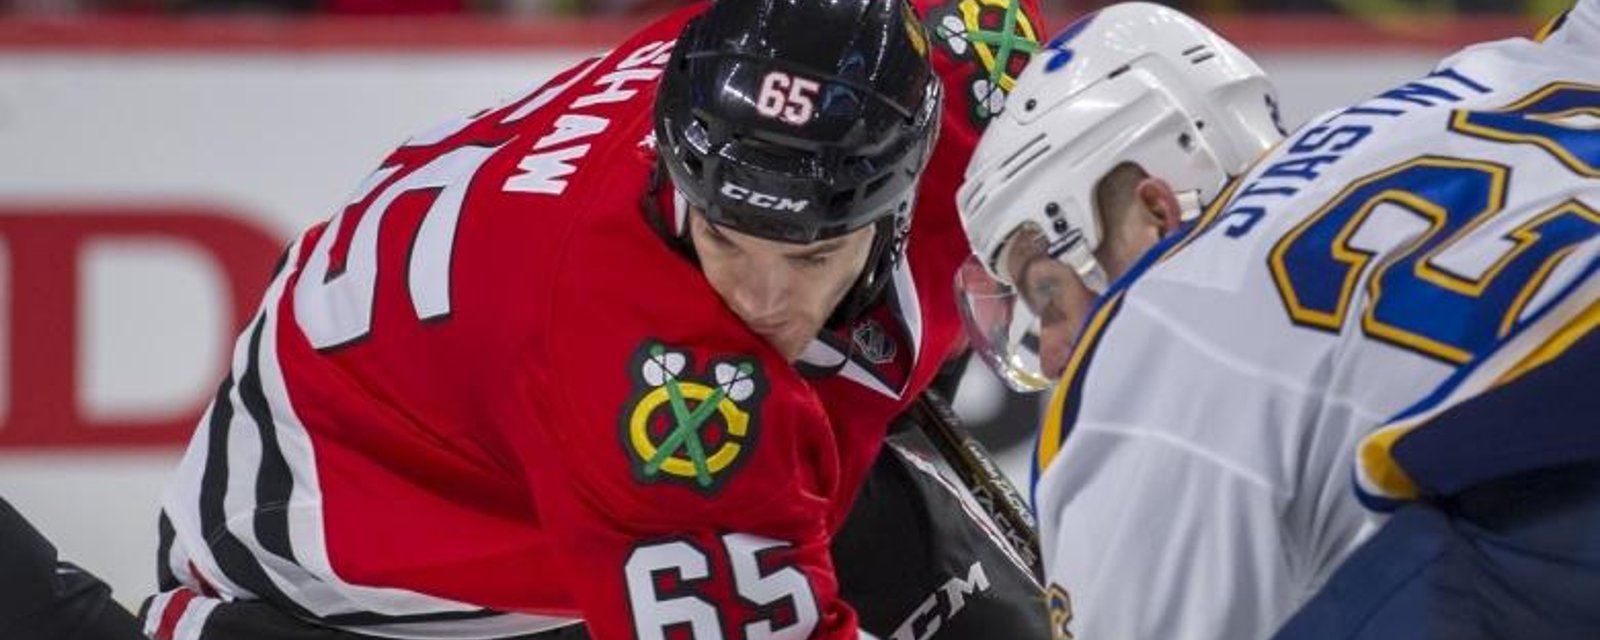 Andrew Shaw issues public apology right after claiming he didn't remember what he said.